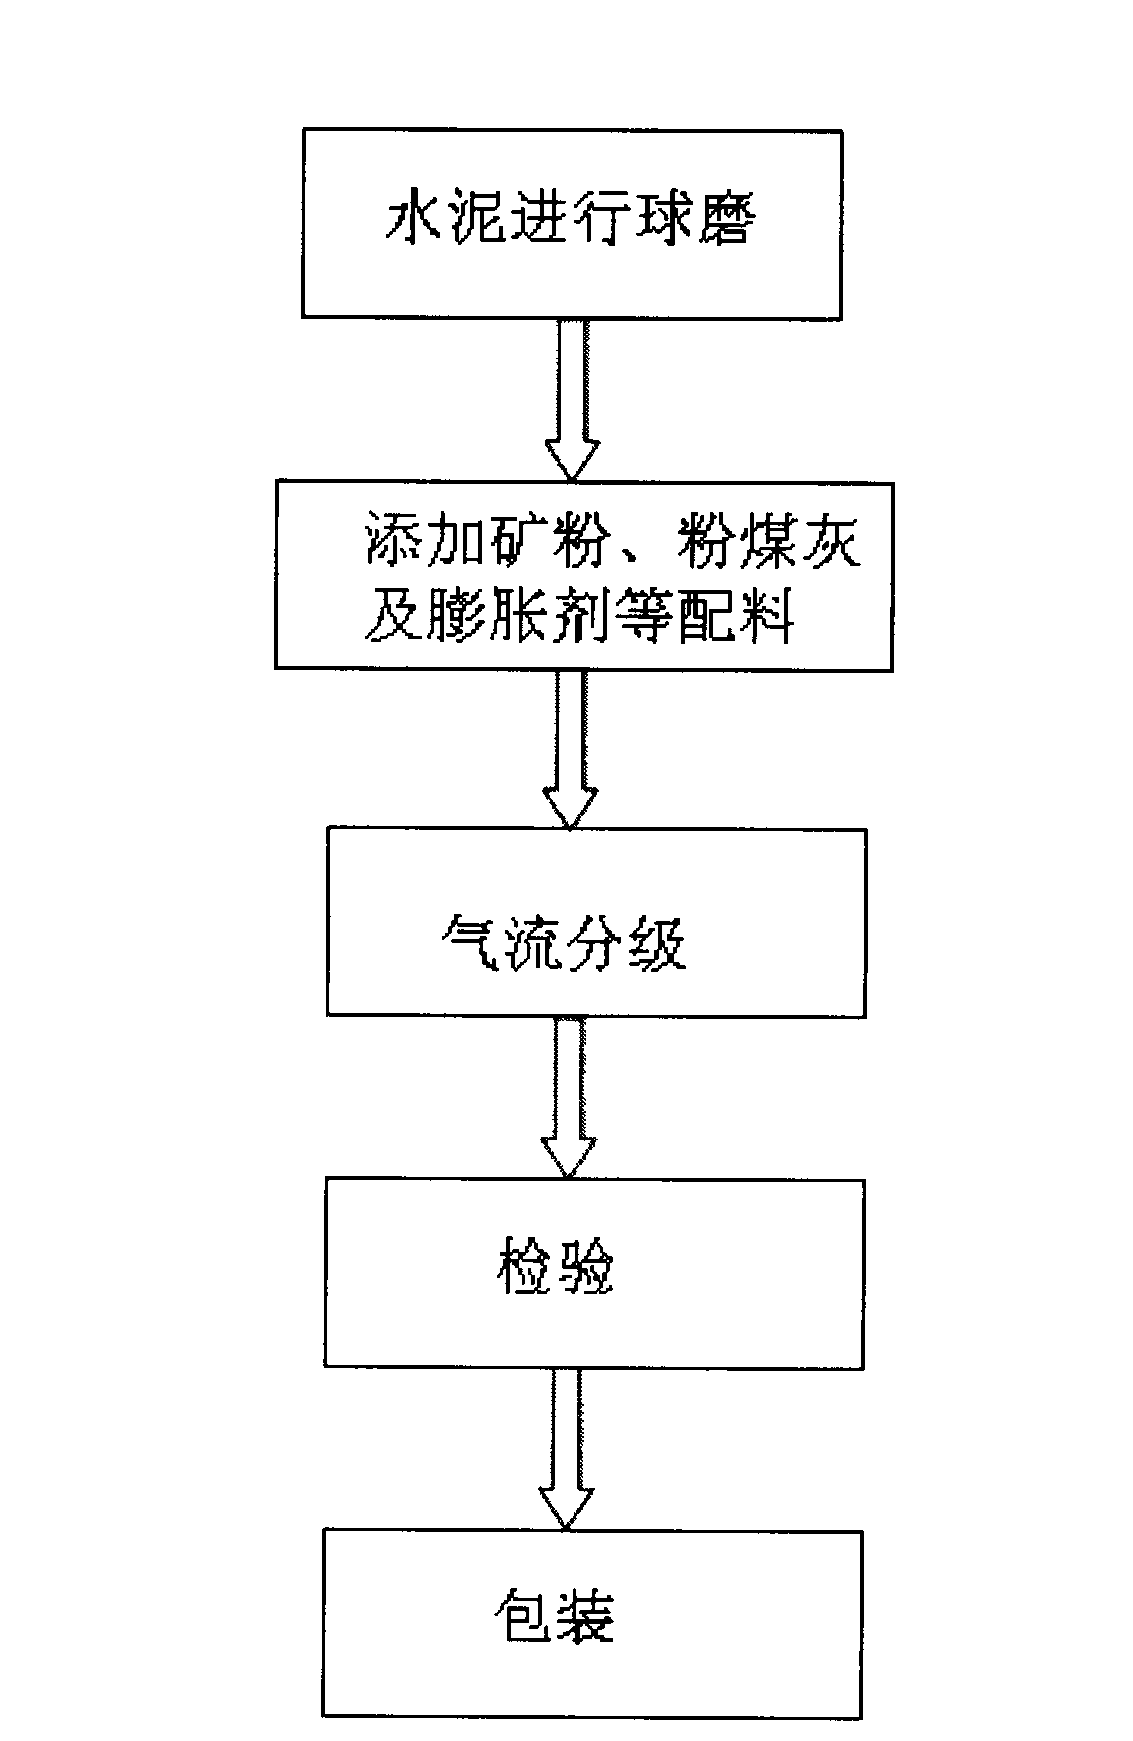 Ultra-fine powder cement admixture and manufacturing method thereof